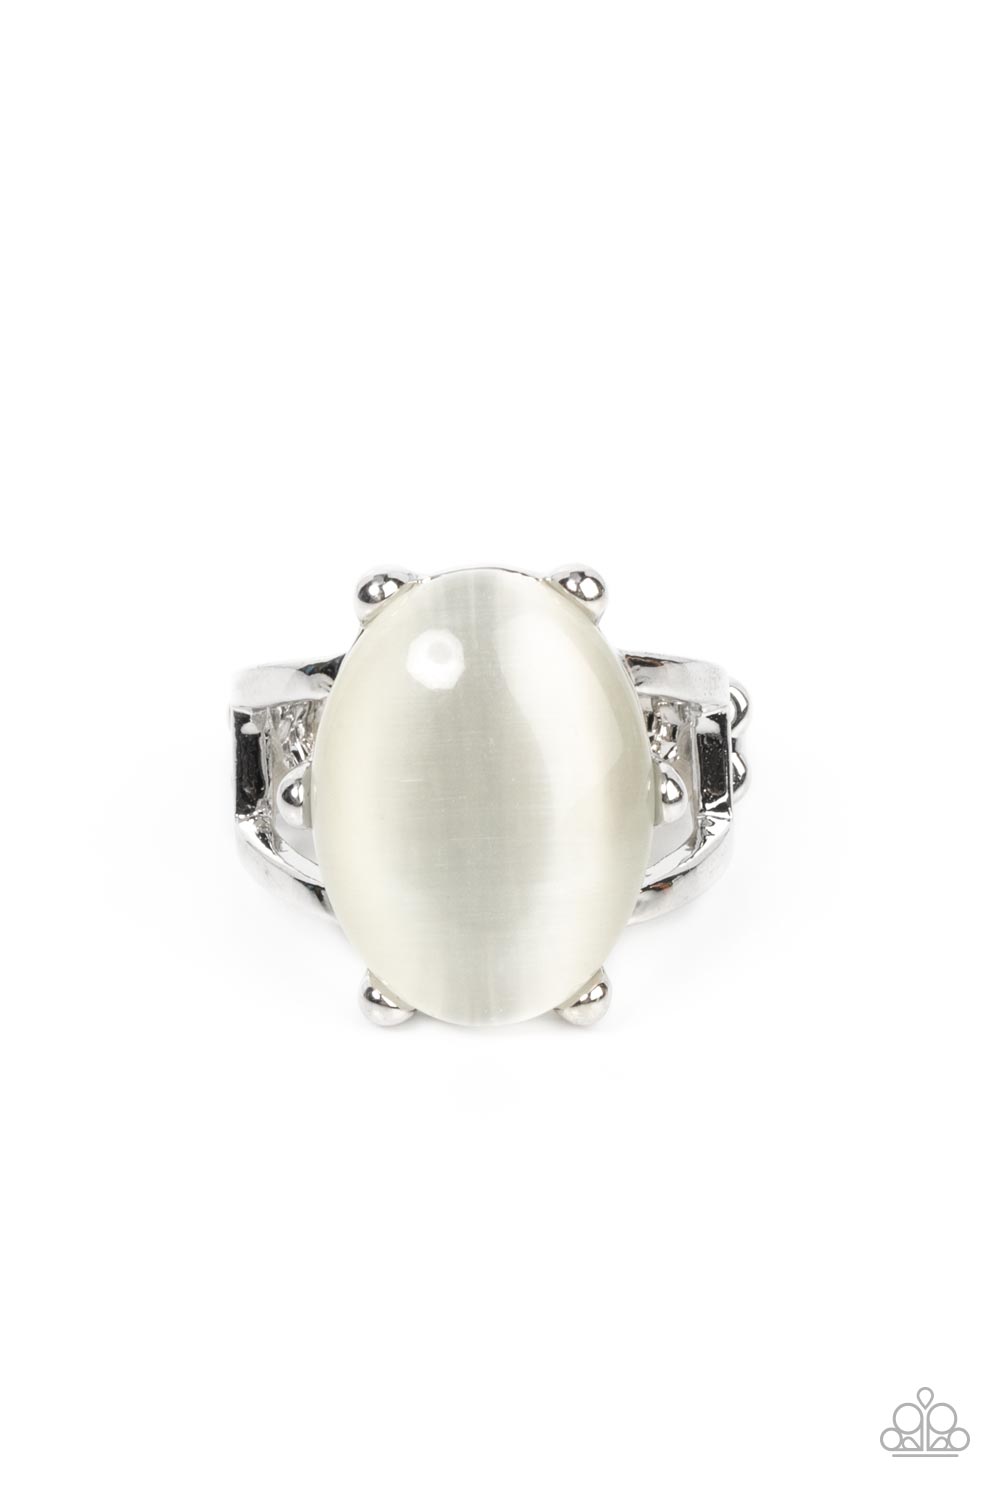 Enchantingly Everglades White Ring - Paparazzi Accessories  An oval white cat's eye gemstone sits atop a pronged silver frame along two layered silver bands, resulting in an enchanting centerpiece atop the finger. Features a stretchy band for a flexible fit.  Sold as one individual ring.